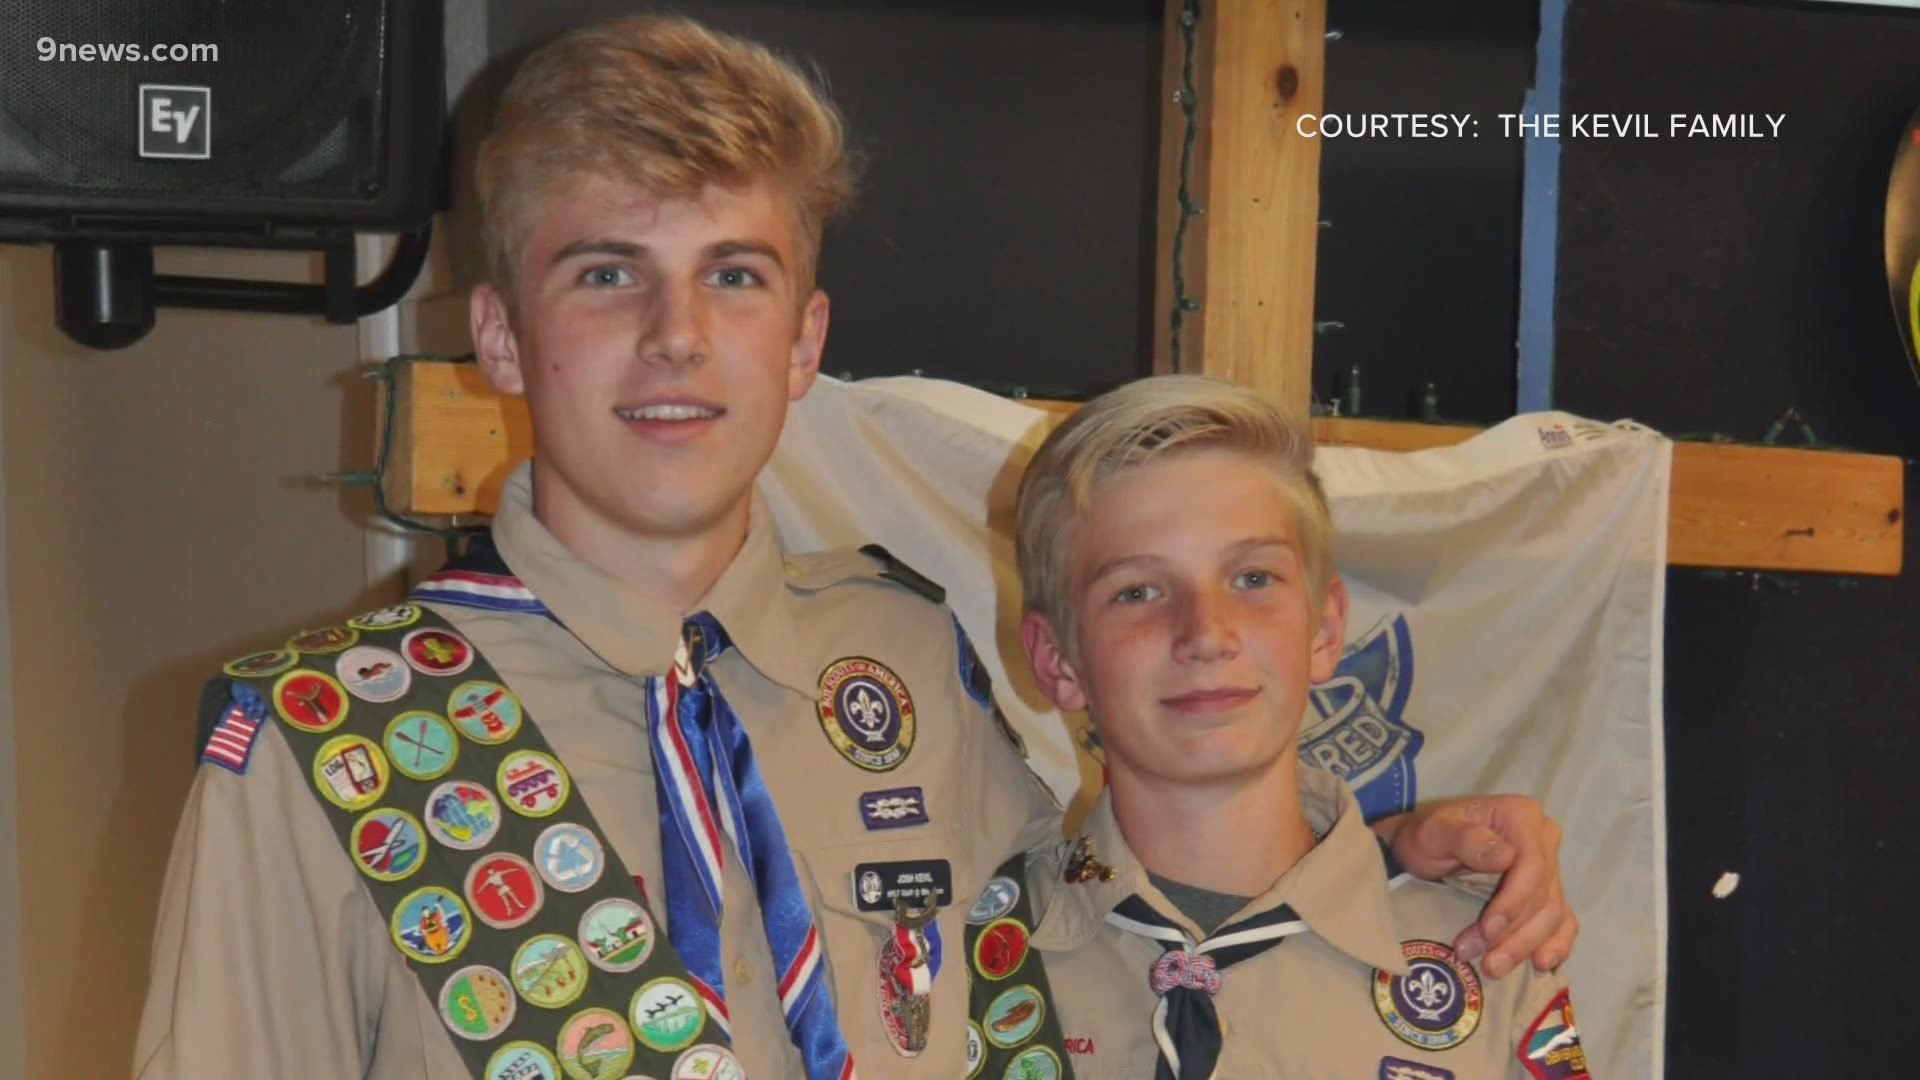 Photojournalist Byron Reed shares how earning a merit badge helped one Boy Scout save his brother.